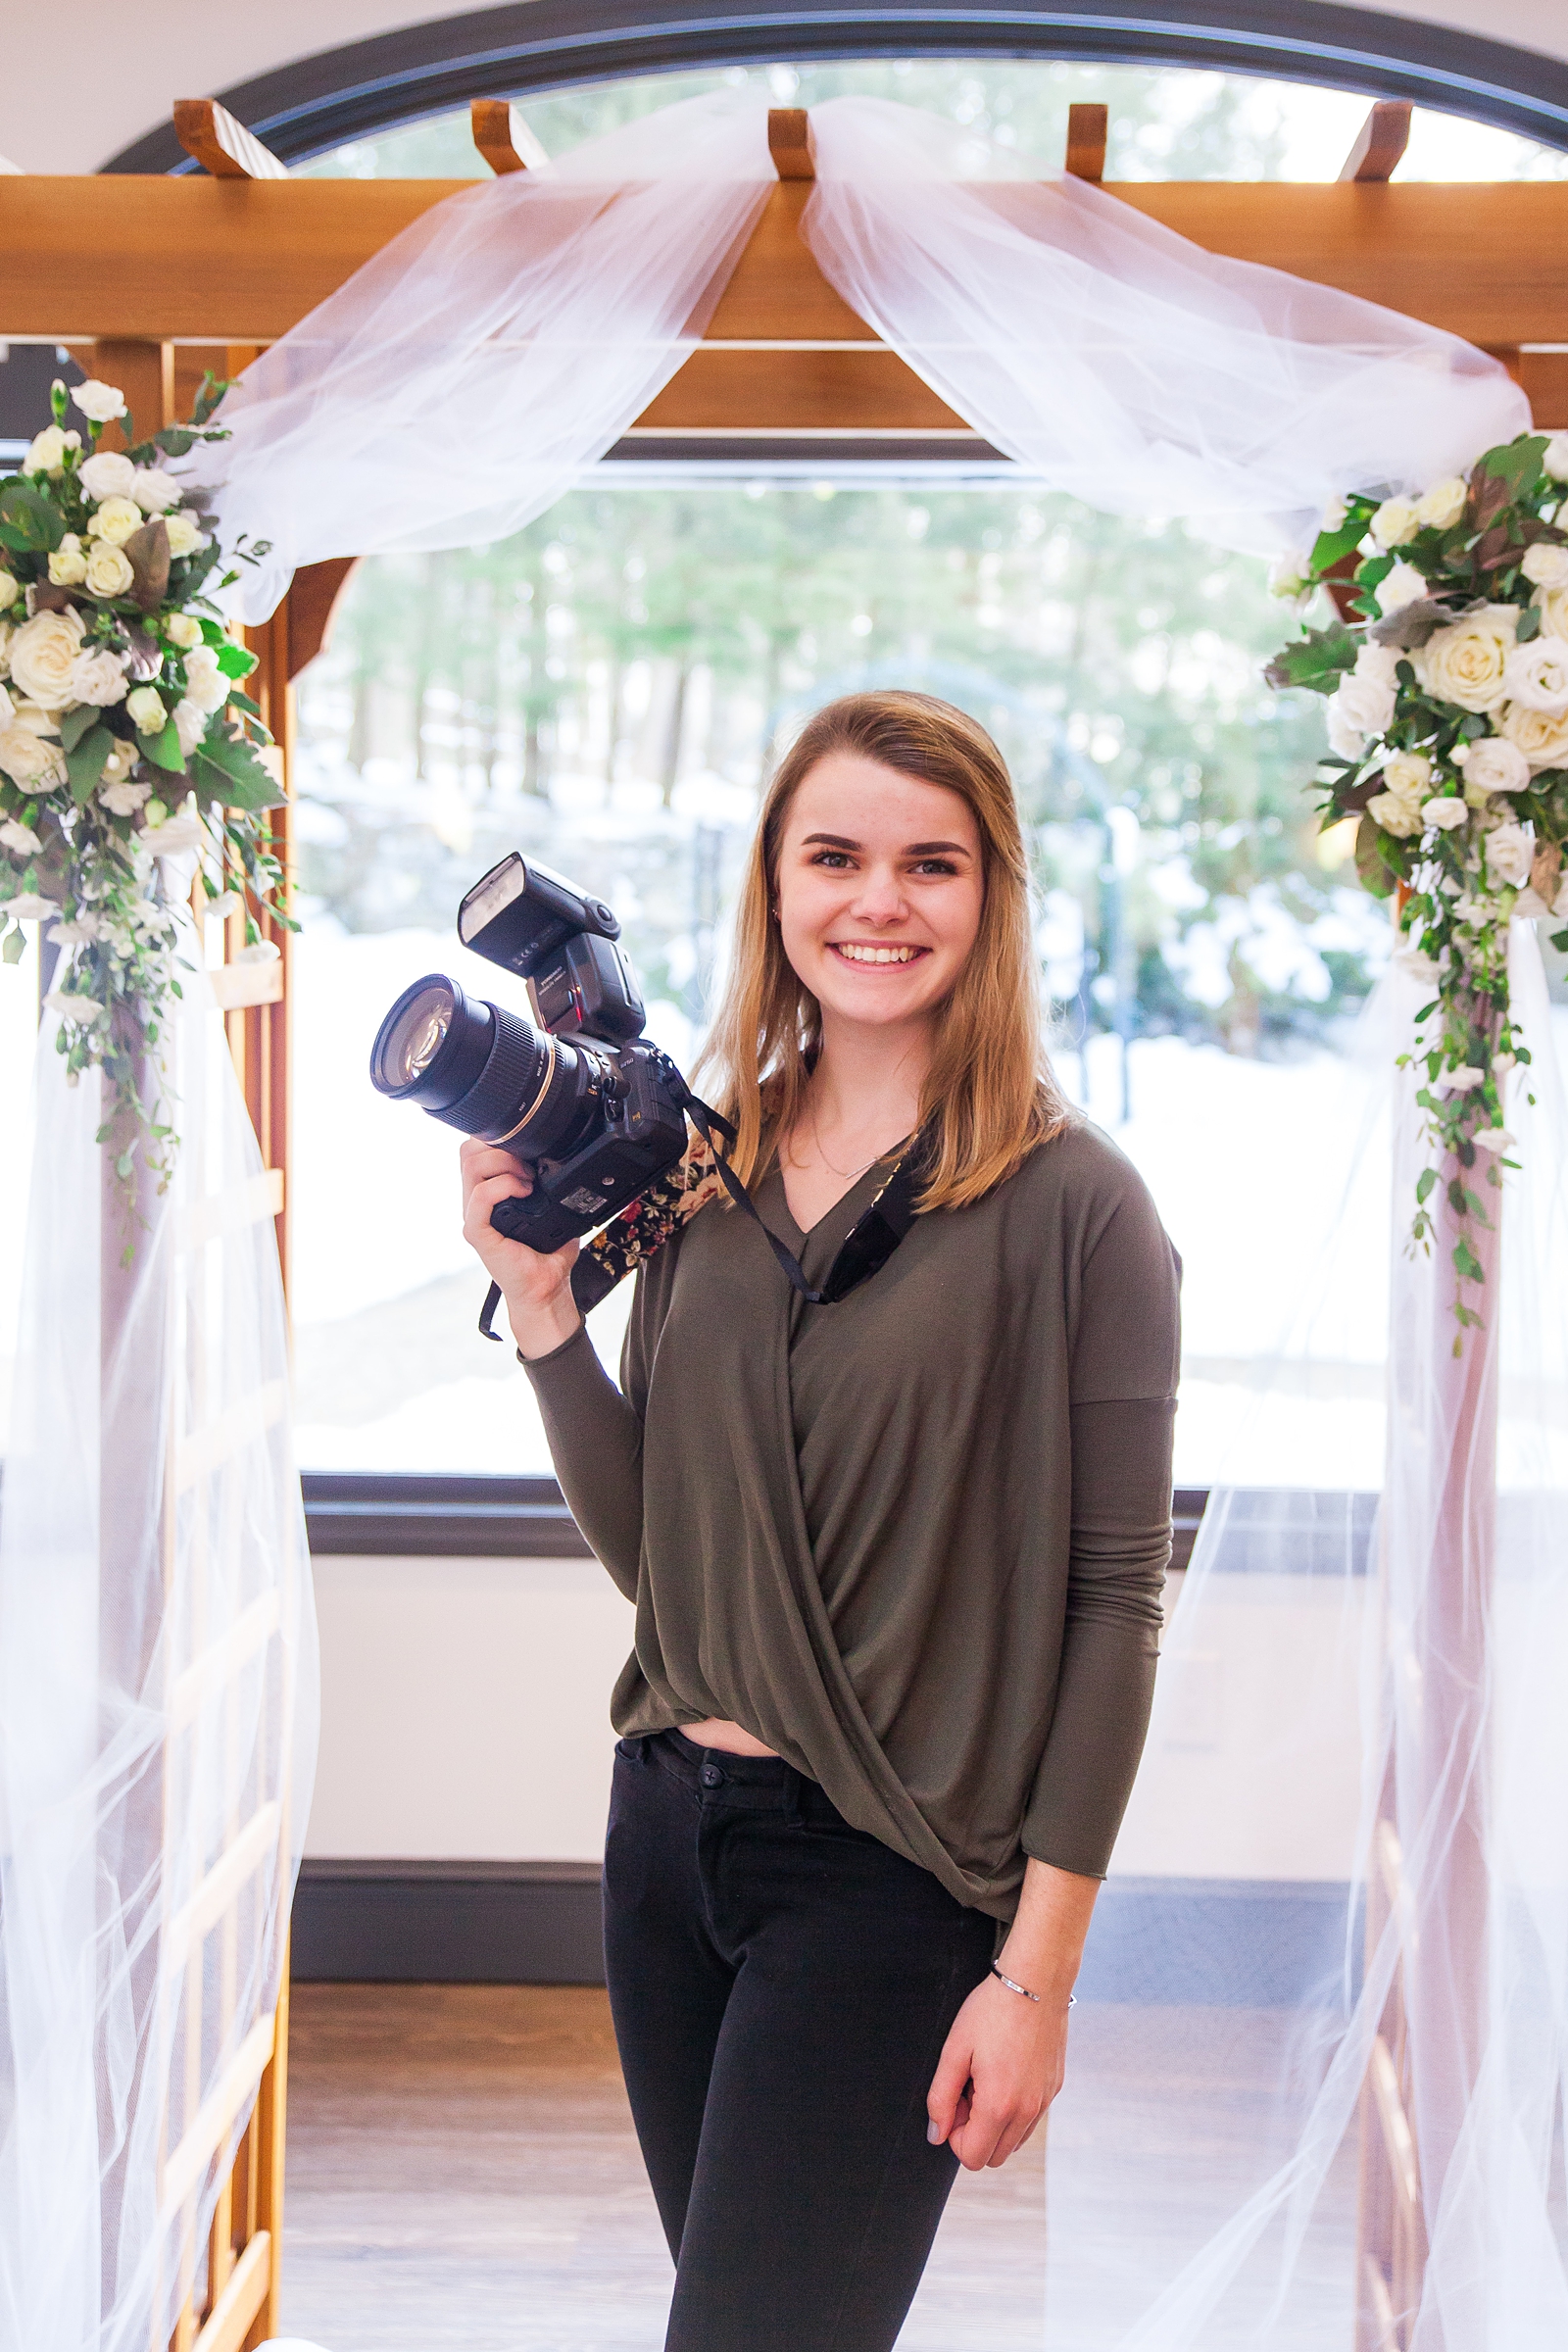 Southern NH Wedding Photographer shares 5 tips to nail wedding consultations